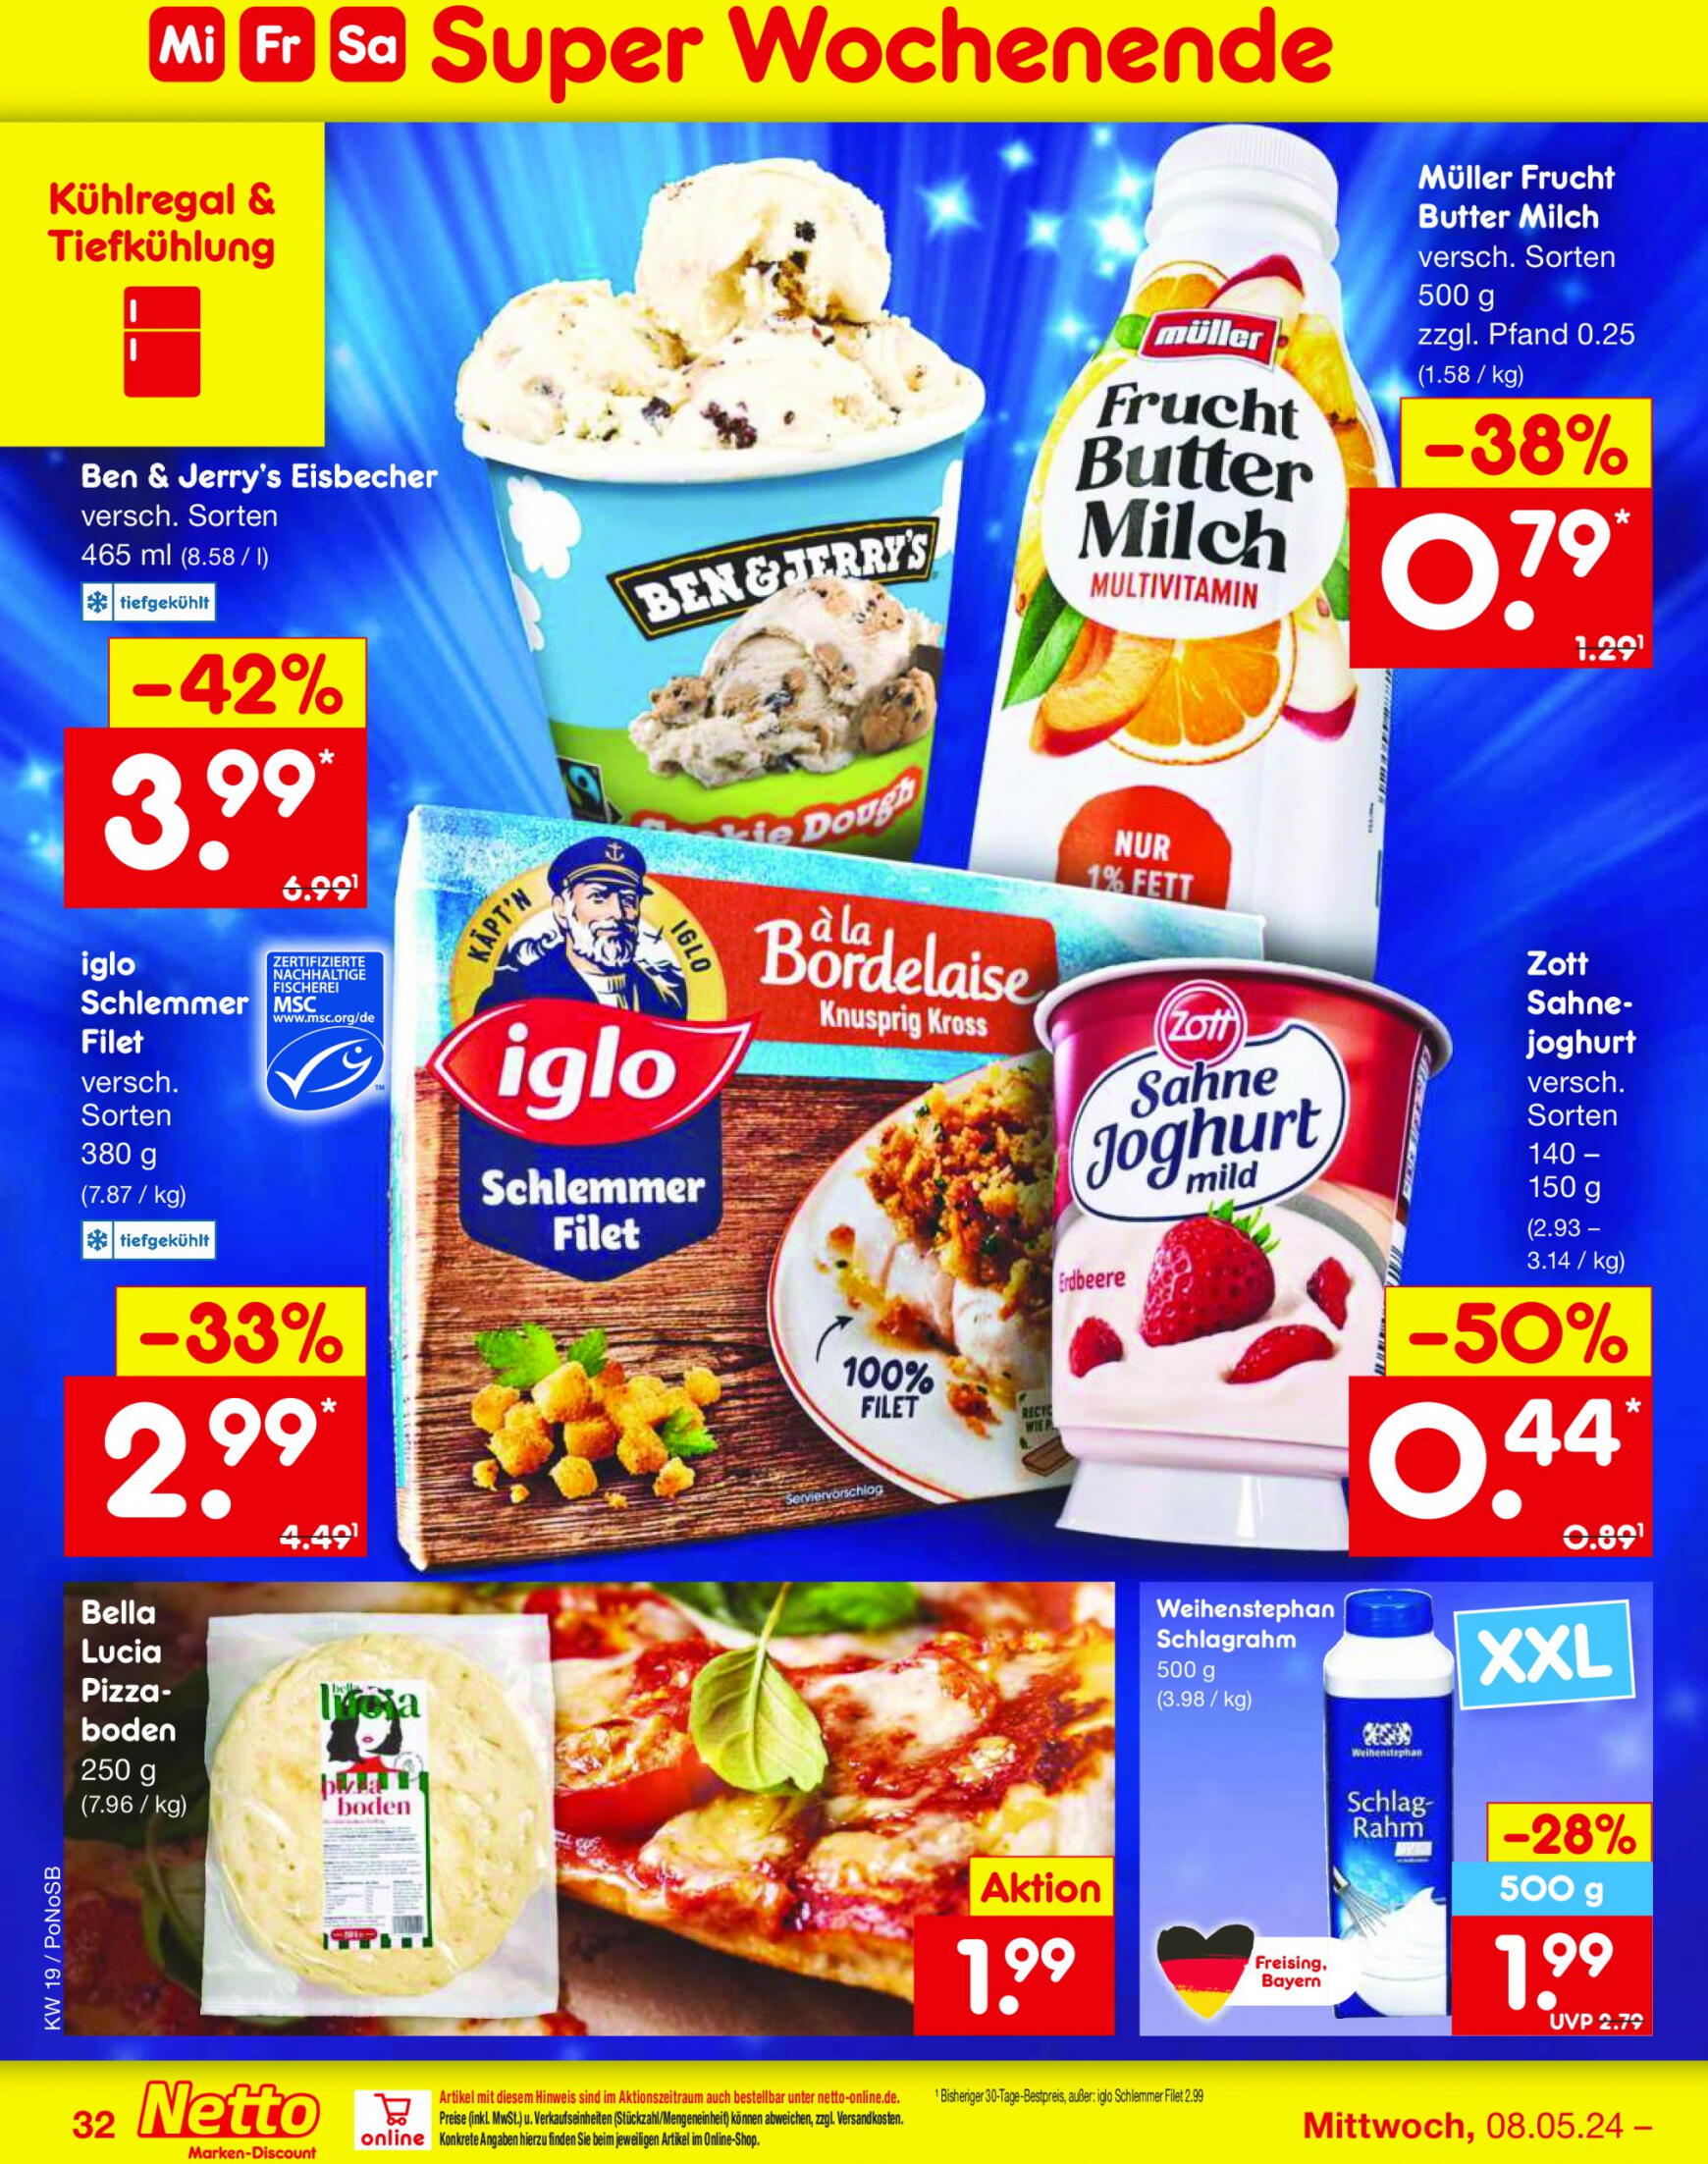 netto - Flyer Netto aktuell 06.05. - 11.05. - page: 42